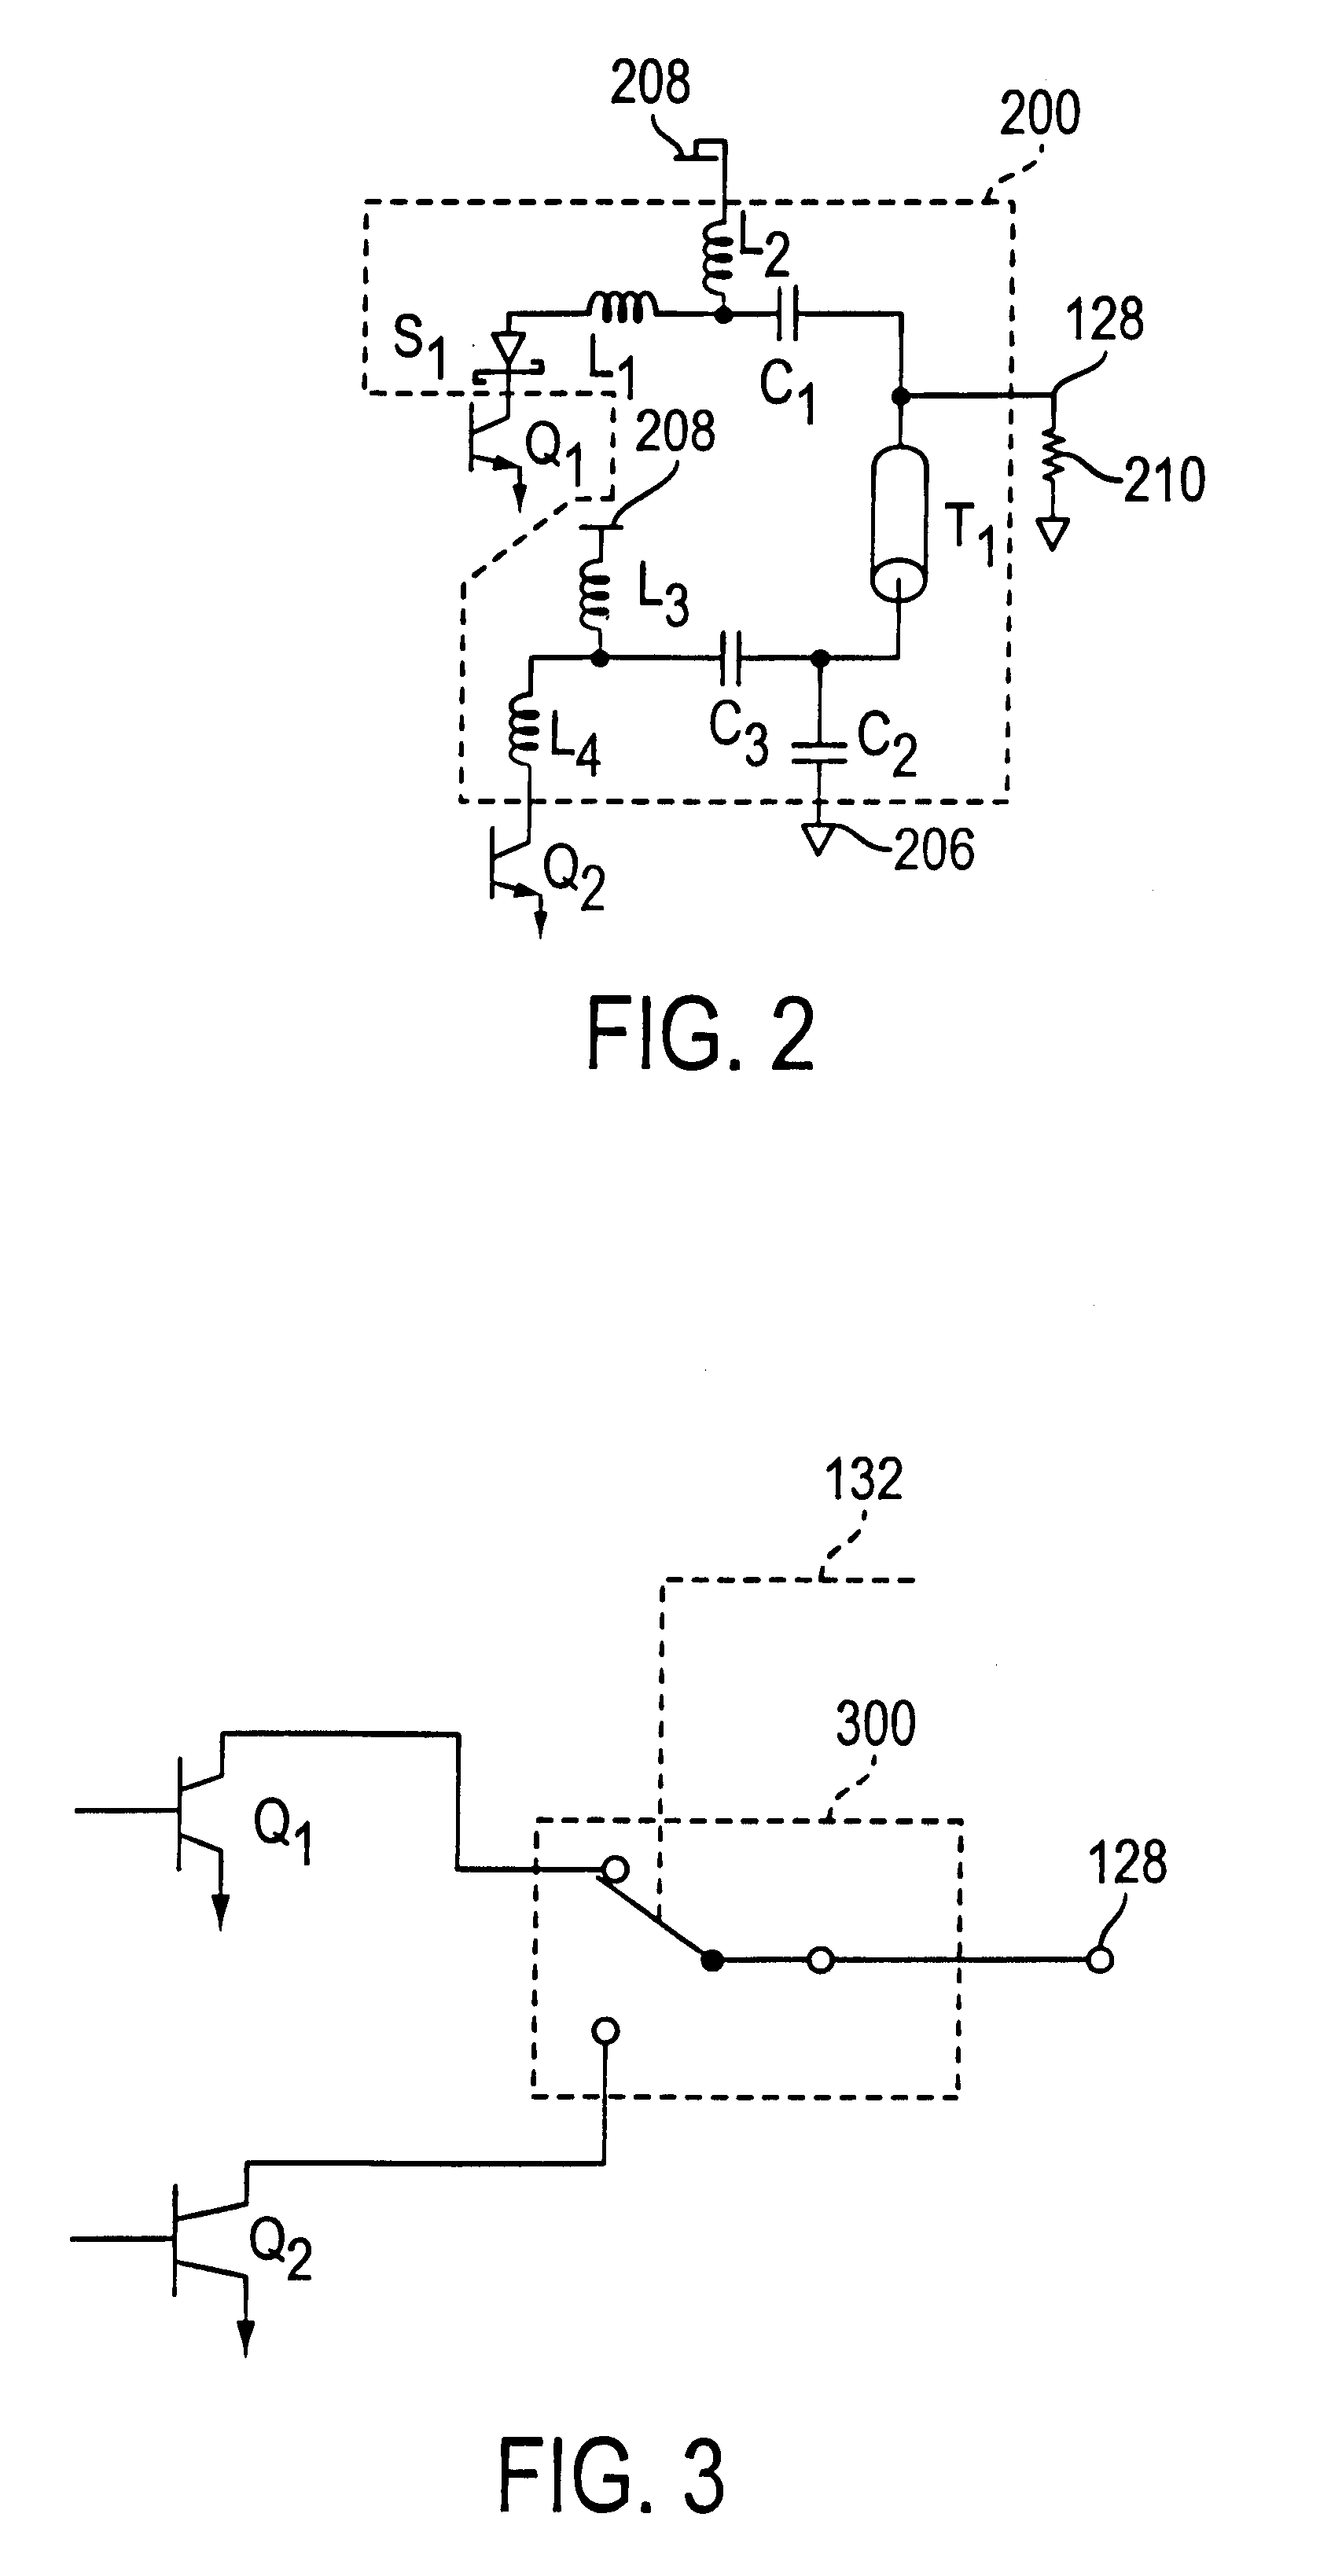 Switchable path power amplifier with combining network